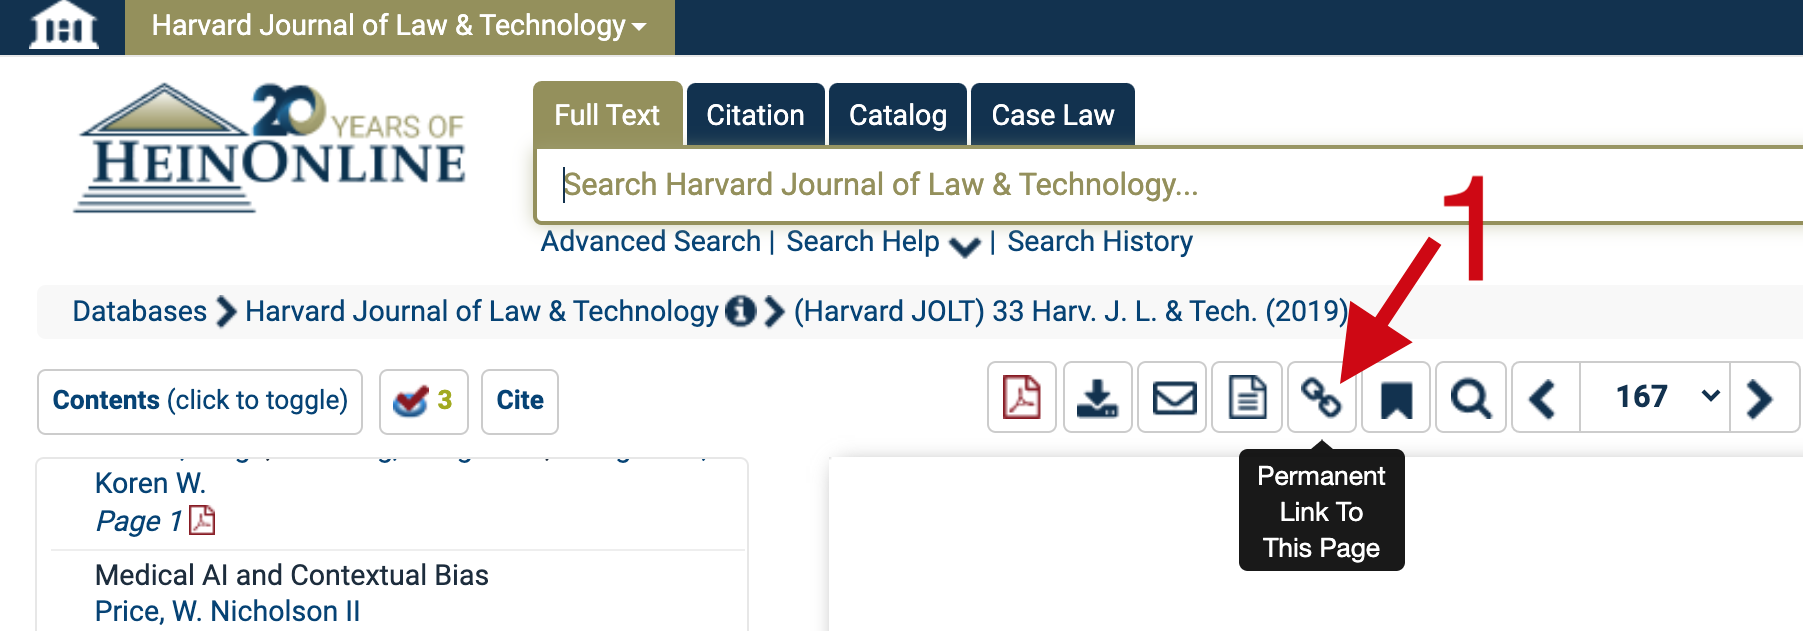 Screenshot of HeinOnline Database showing where to find persistent link button on the toolbar